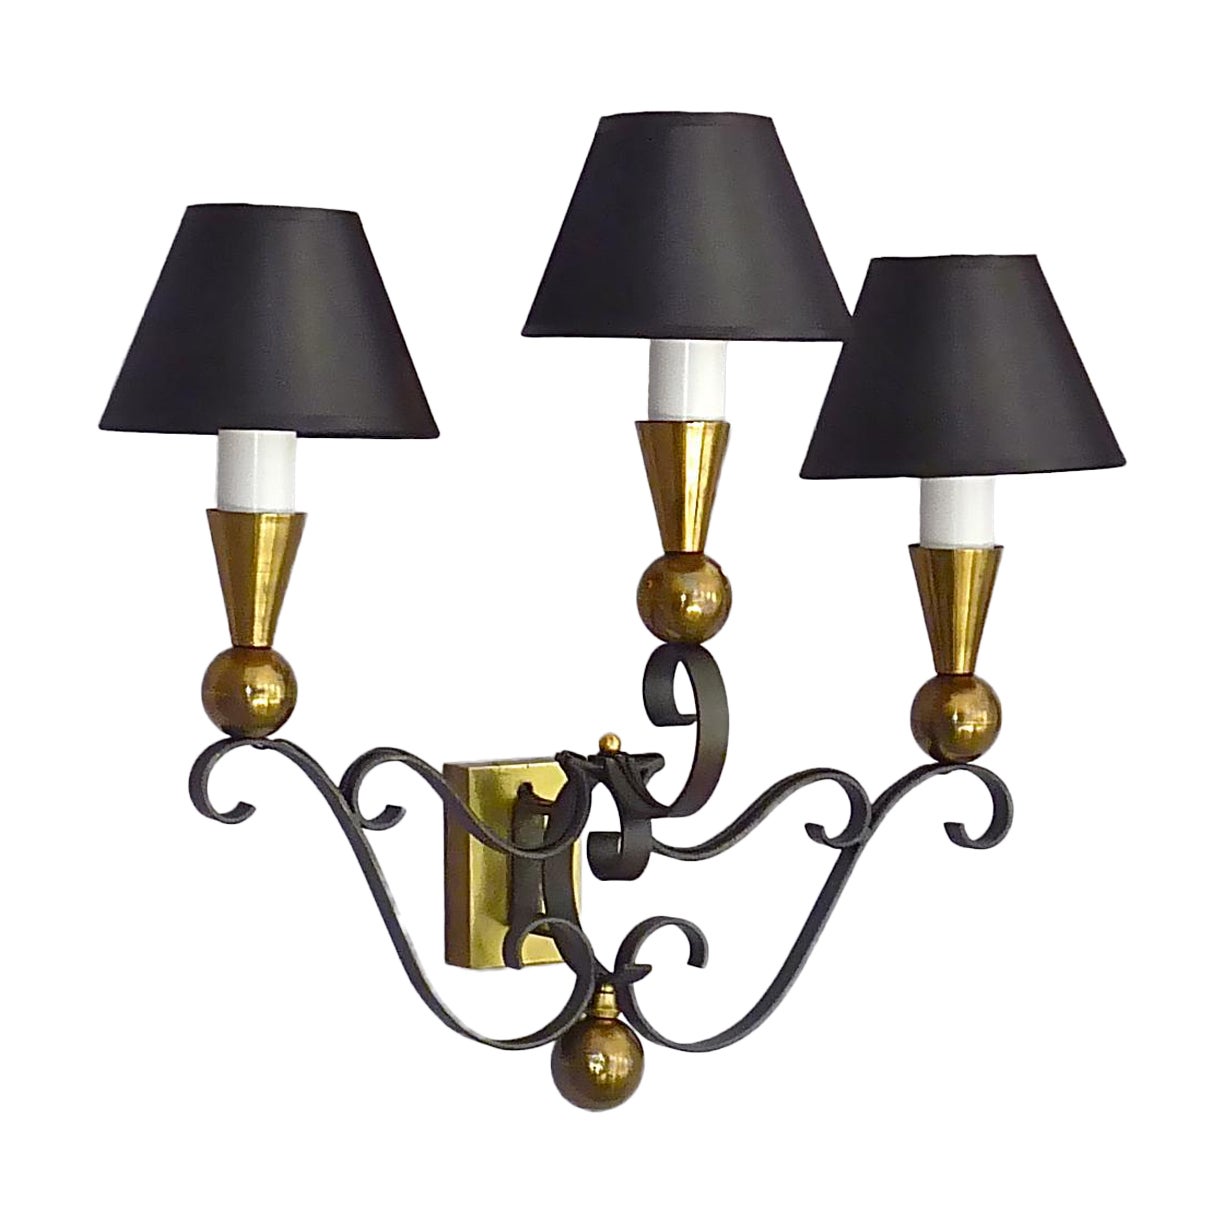 3 Rare Sconces Poillerat Adnet Style Black Forged Iron Brass Gold France 1950s For Sale